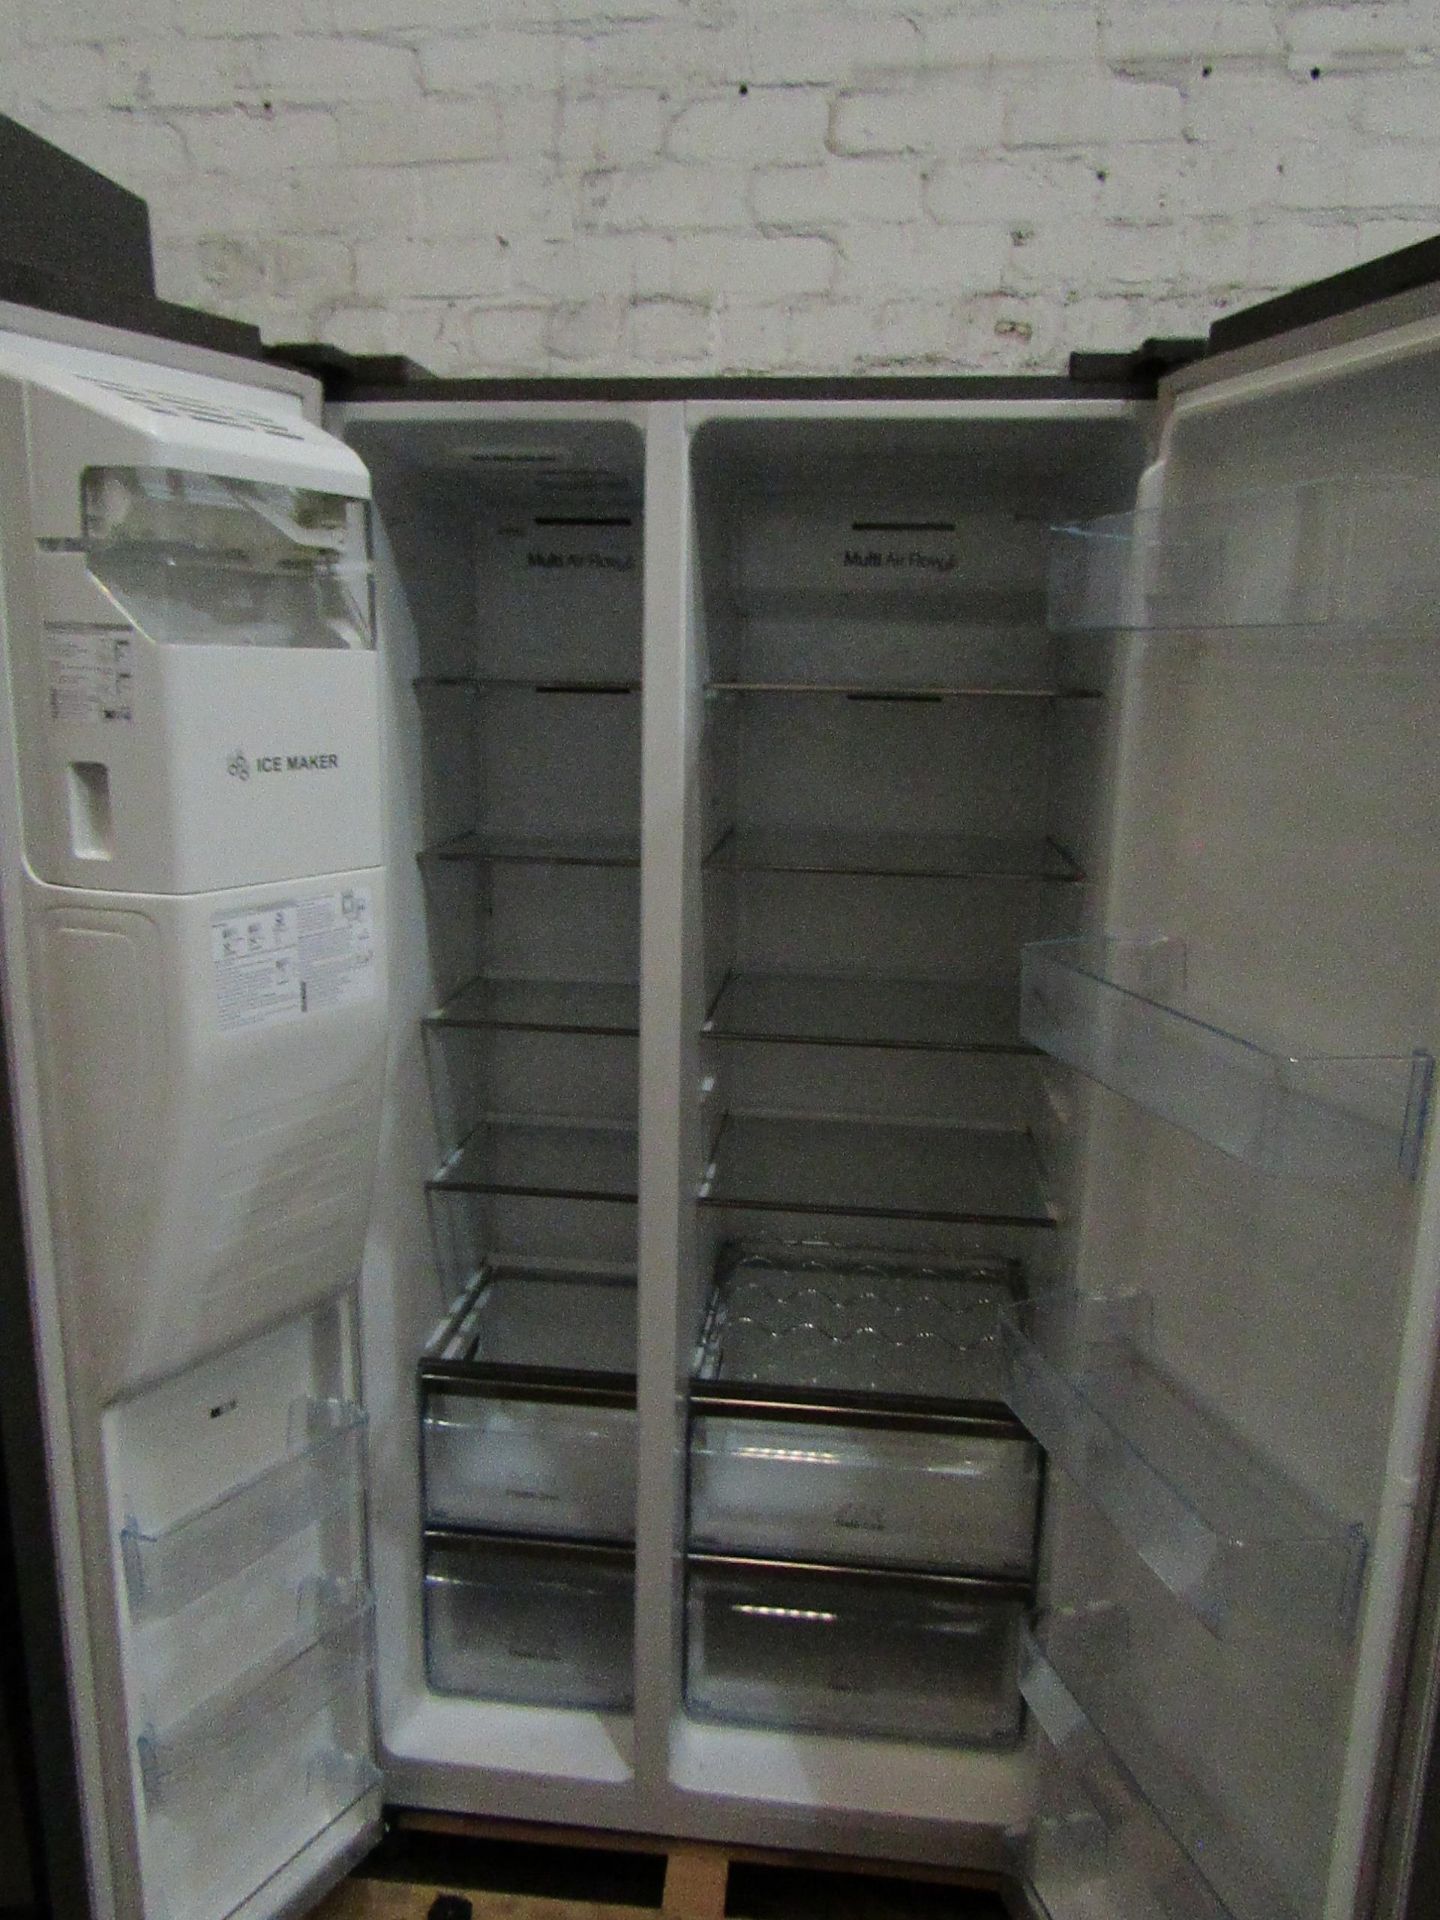 Hisense American fridge freezer with water and ice dispenser, tested working for coldness, the - Image 2 of 2